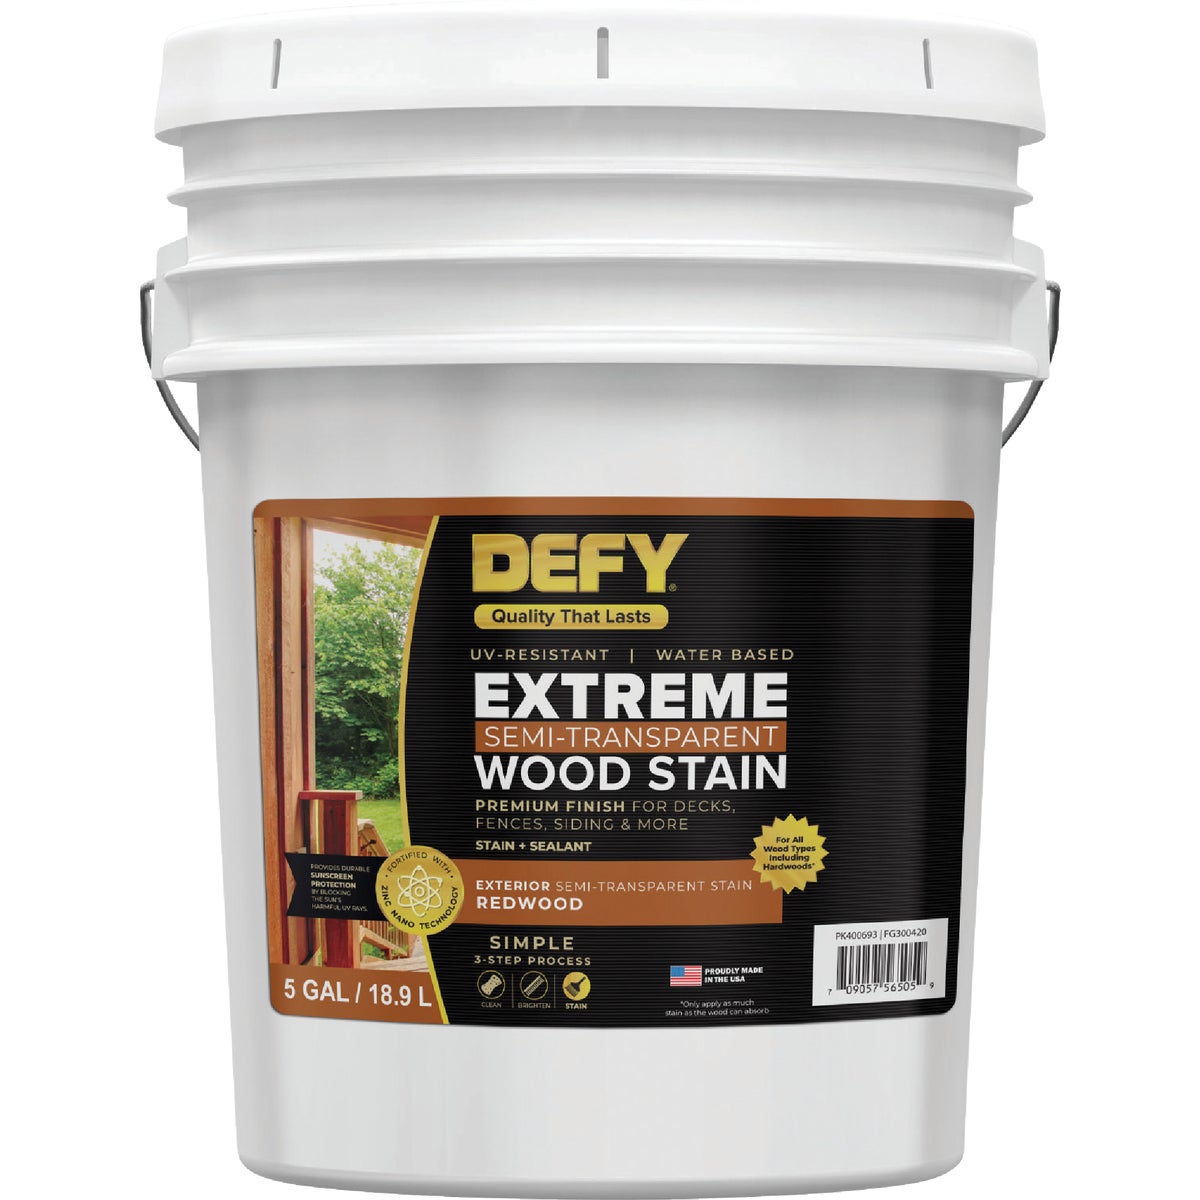 DEFY Extreme Semi-Transparent Exterior Wood Stain, Redwood, 5 Gal.